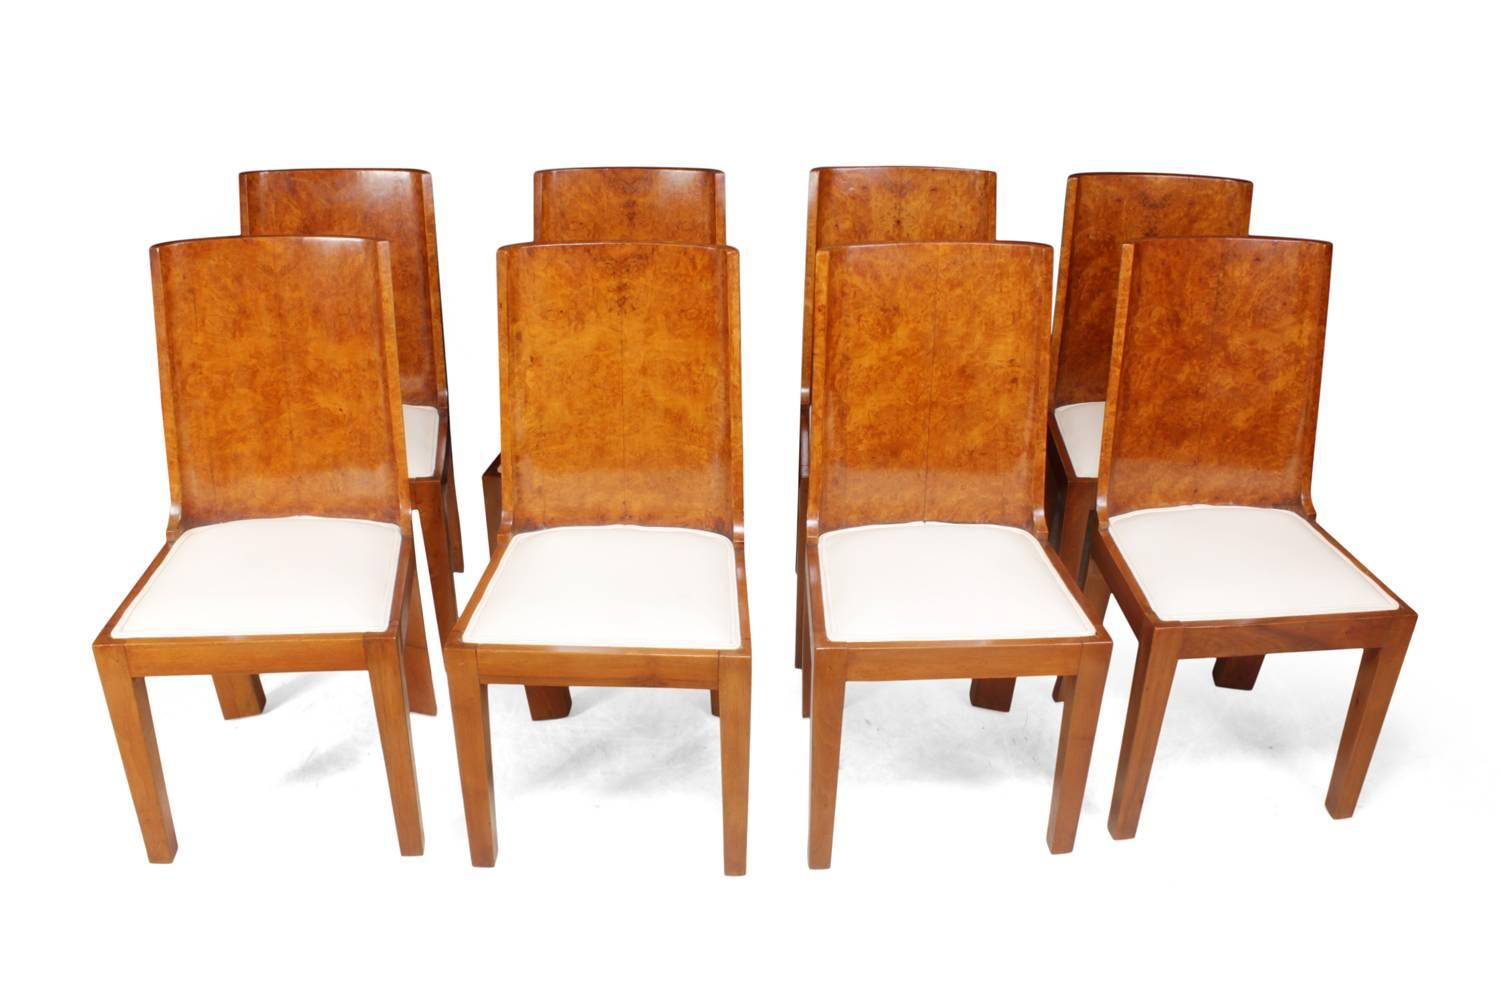 Art Deco dining chairs in walnut set of eight
A set of eight burr walnut curved back Art Deco dining chairs good heavy solid chairs in excellent fully restored with new leather upholstery these chairs have been professionally restored and hand